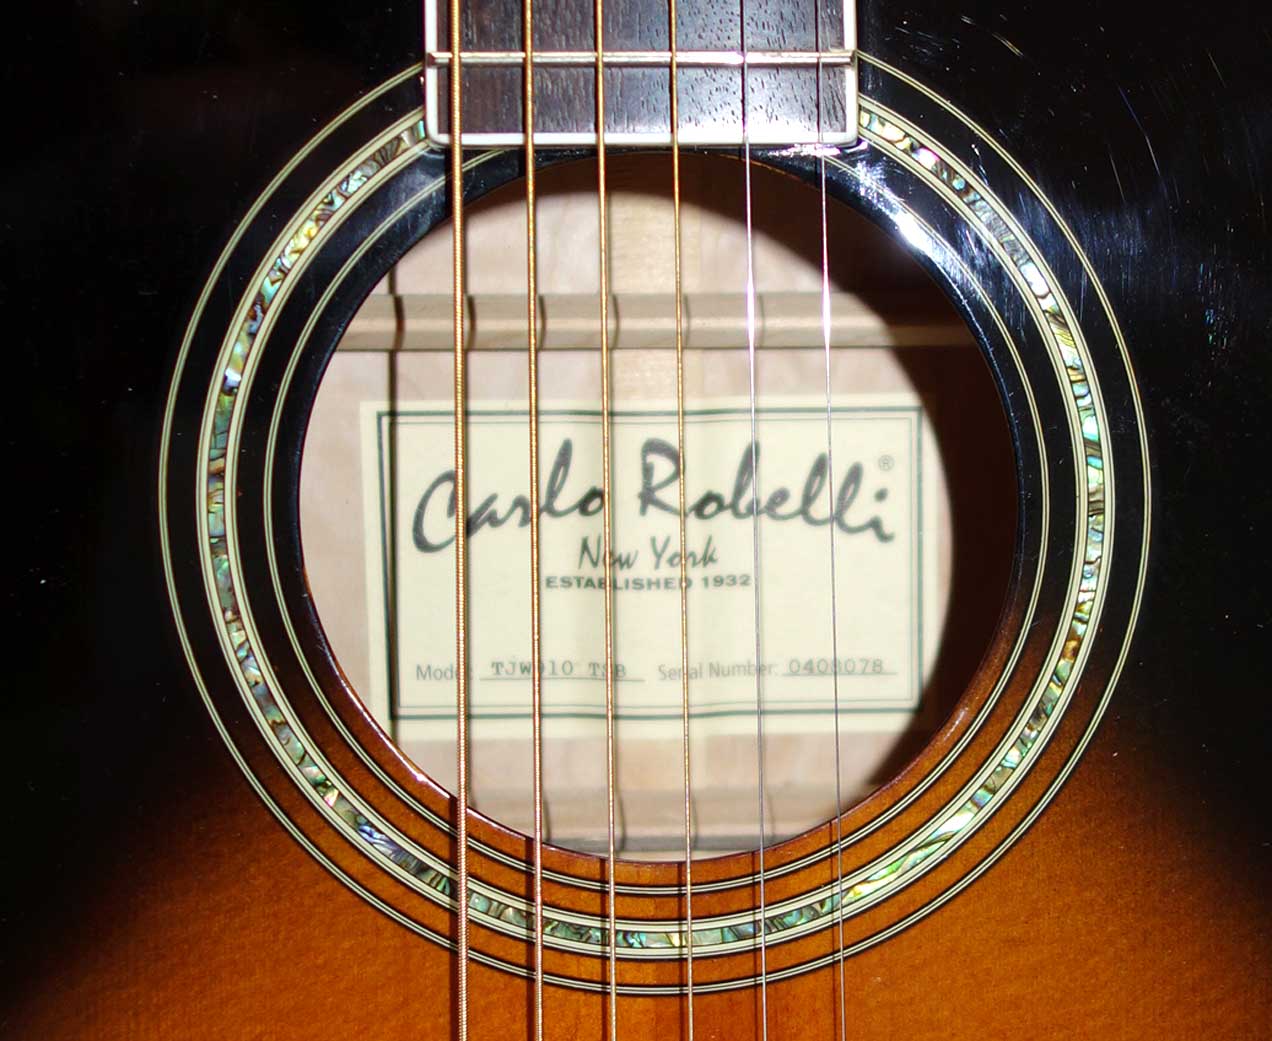 Used Carlo Robelli TJW-910 Jumbo J200-Style Guitar w/Grover Imperial Tuners, Quilted Maple Back/Sides w/Cloud Inlays, Case